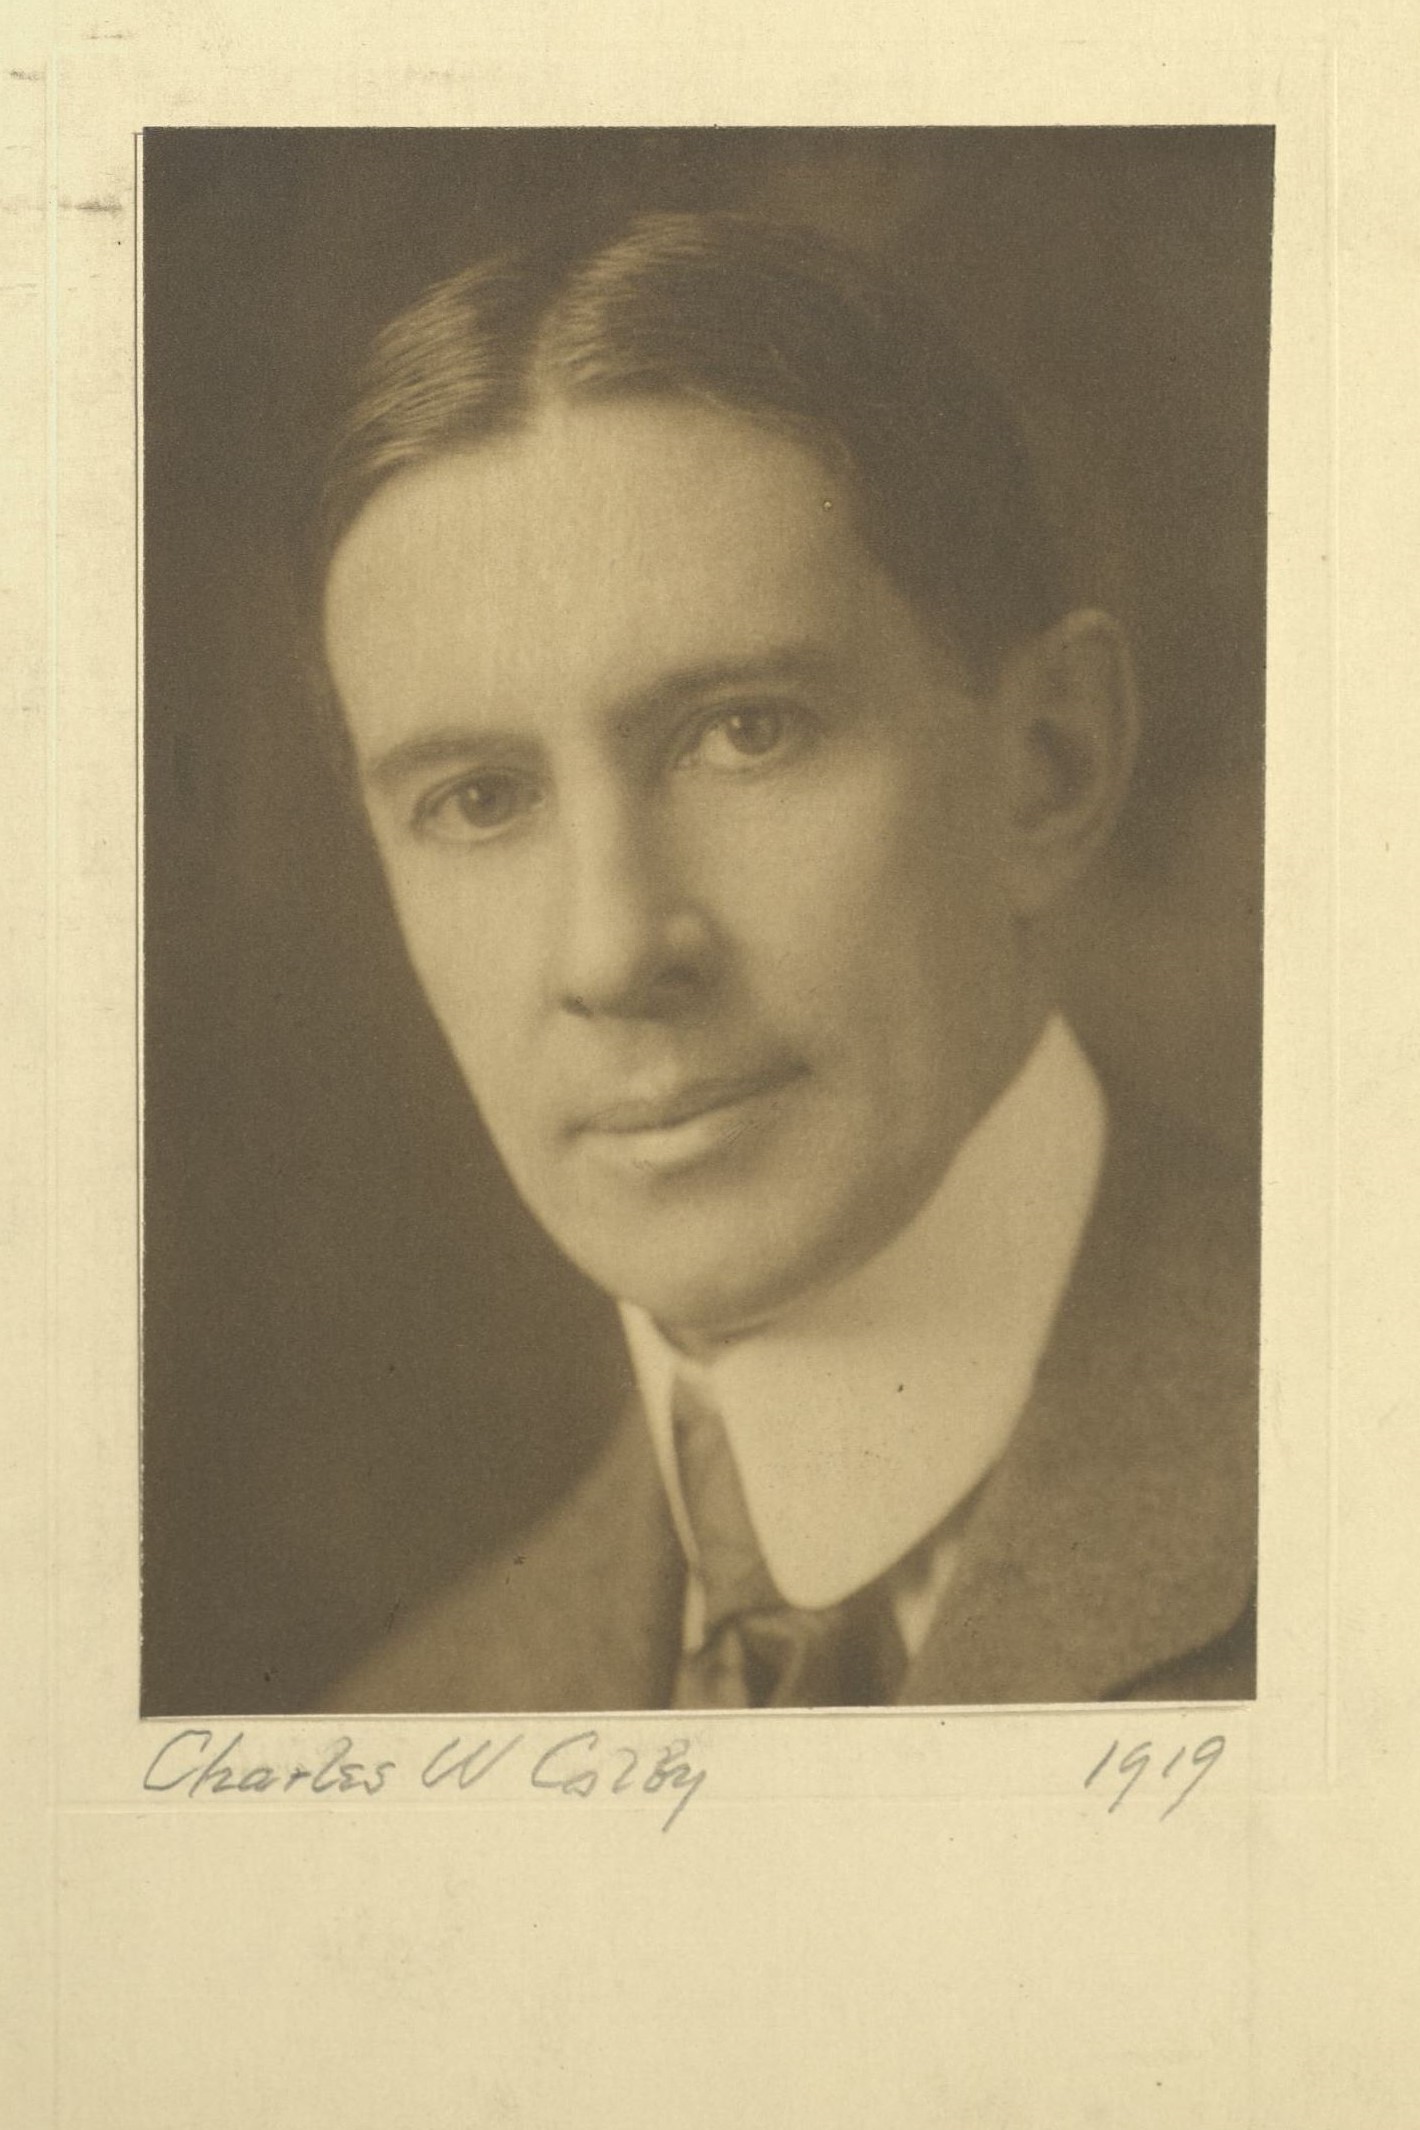 Member portrait of Charles W. Colby